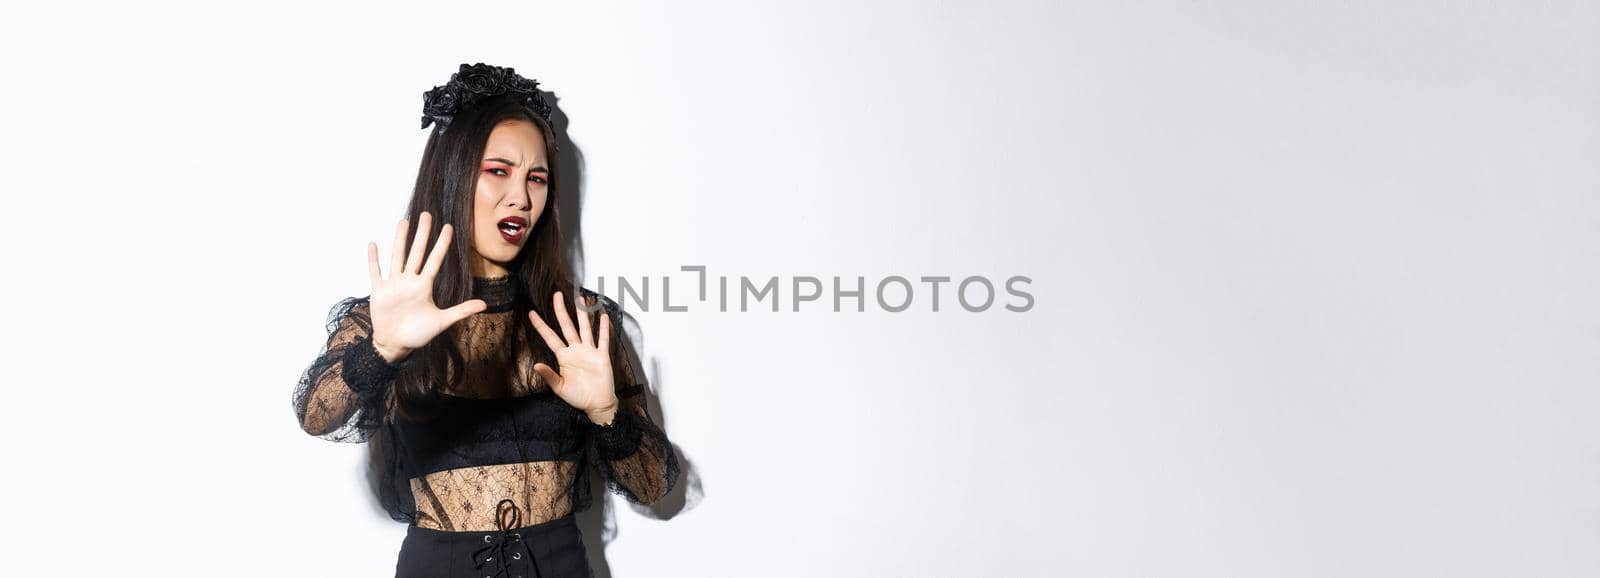 Image of bothered and annoyed asian woman in elegant gothic dress raising hands defensive, grimacing from camera flesh, asking to stop taking pictures of her, standing white background.